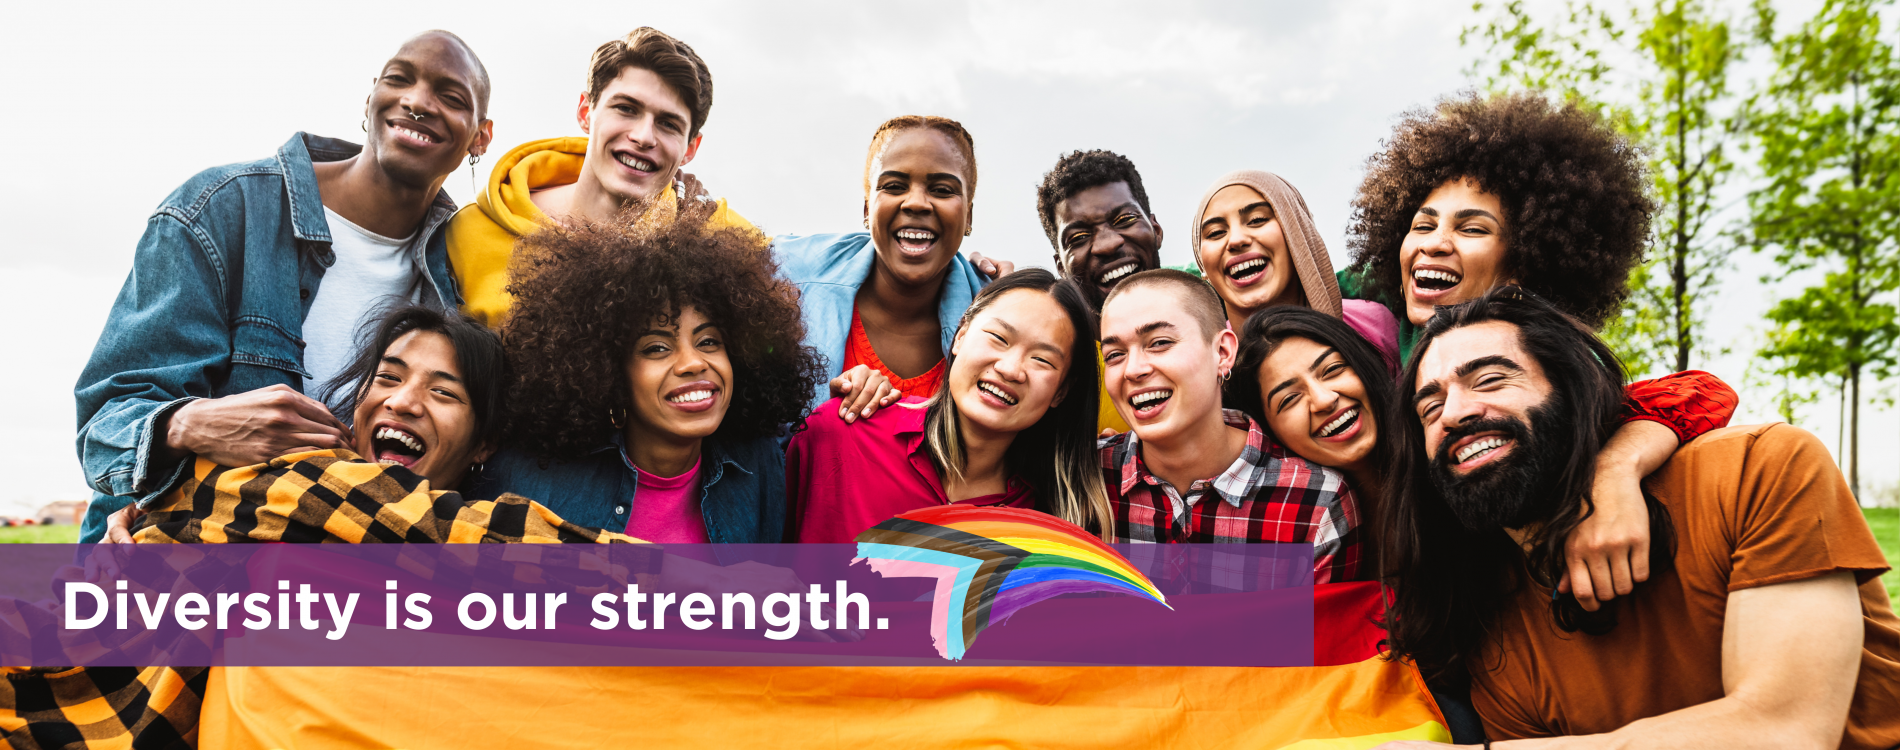 Group of diverse teens with text that says Diversity is our strength and progressive flag